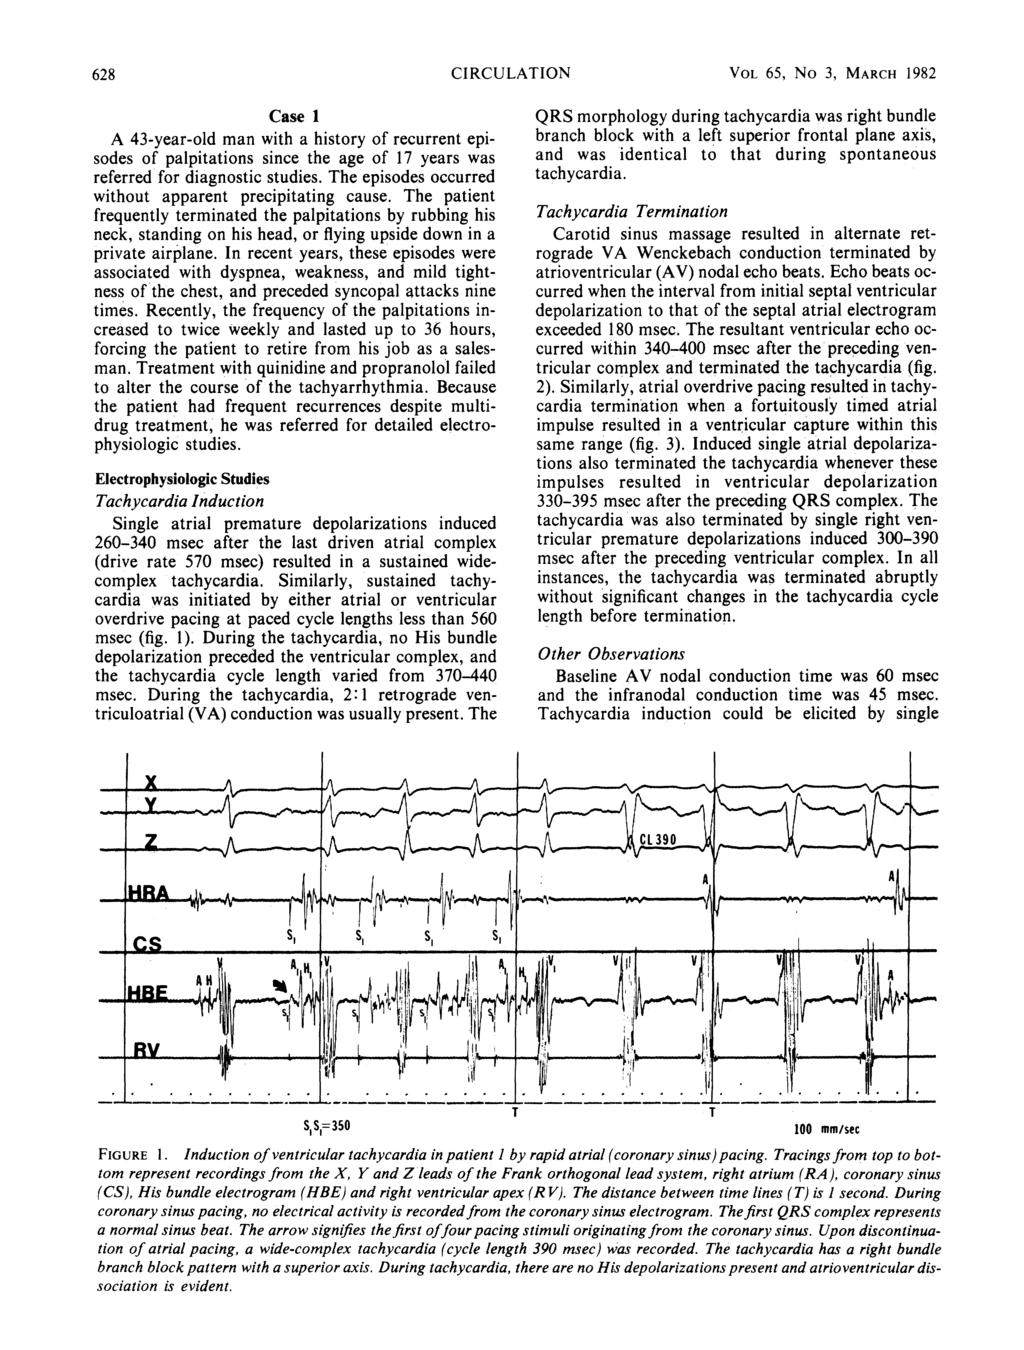 628 CIRCULATION VOL 65, No 3, MARCH 1982 Case 1 A 43-year-old man with a history of recurrent episodes of palpitations since the age of 17 years was referred for diagnostic studies.